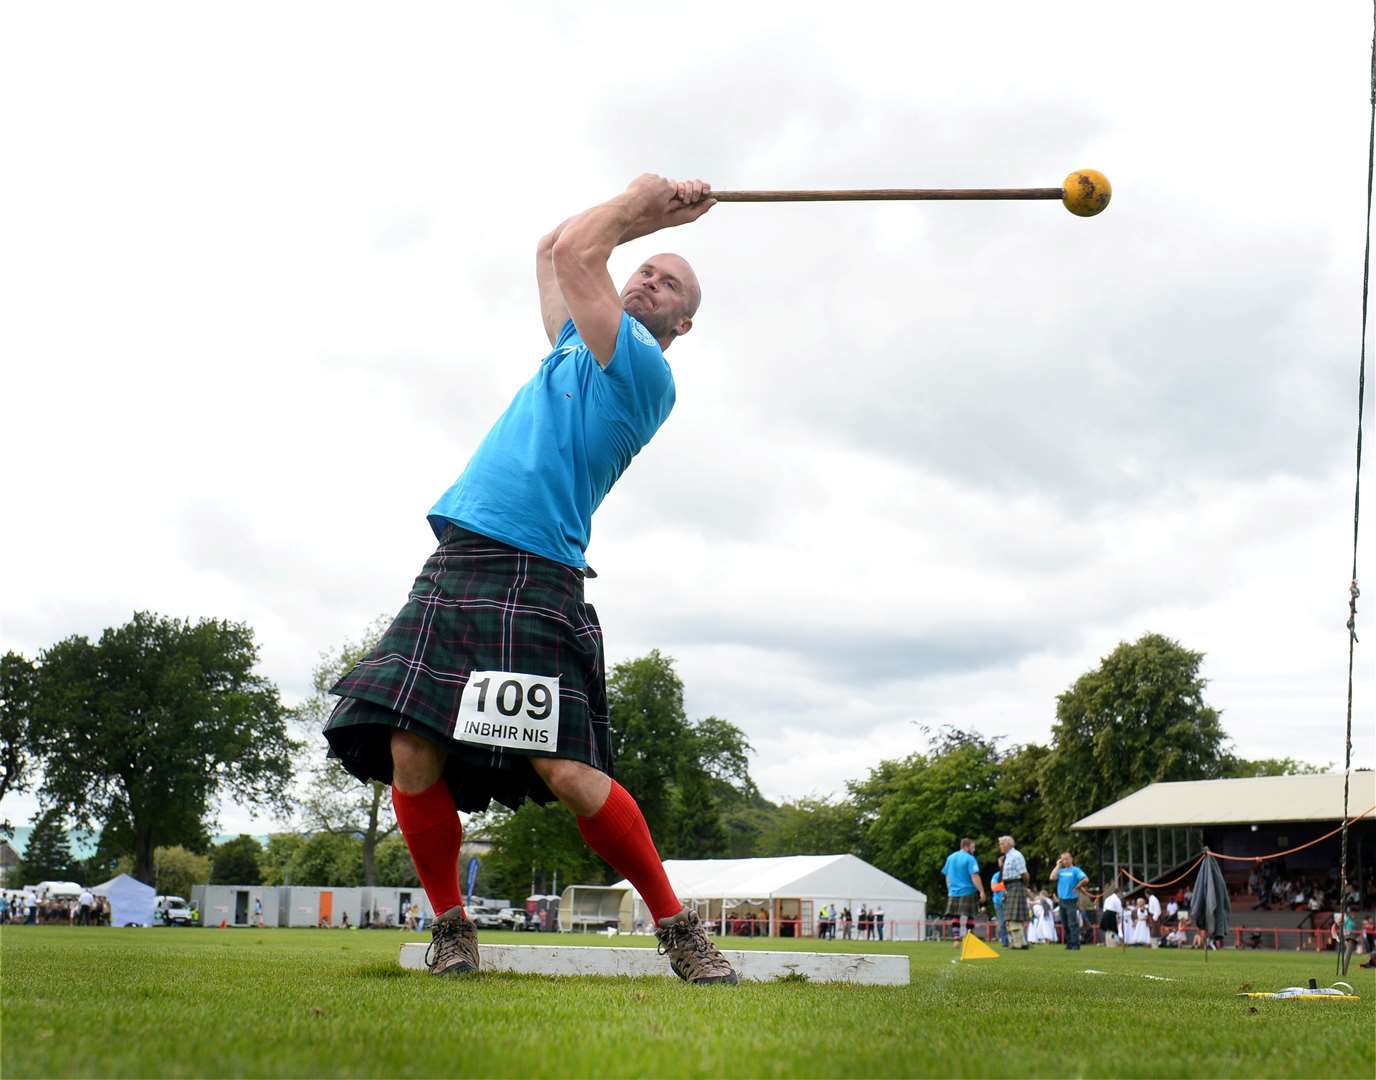 John Odden in hammer action at a previous Inverness Highland Games.